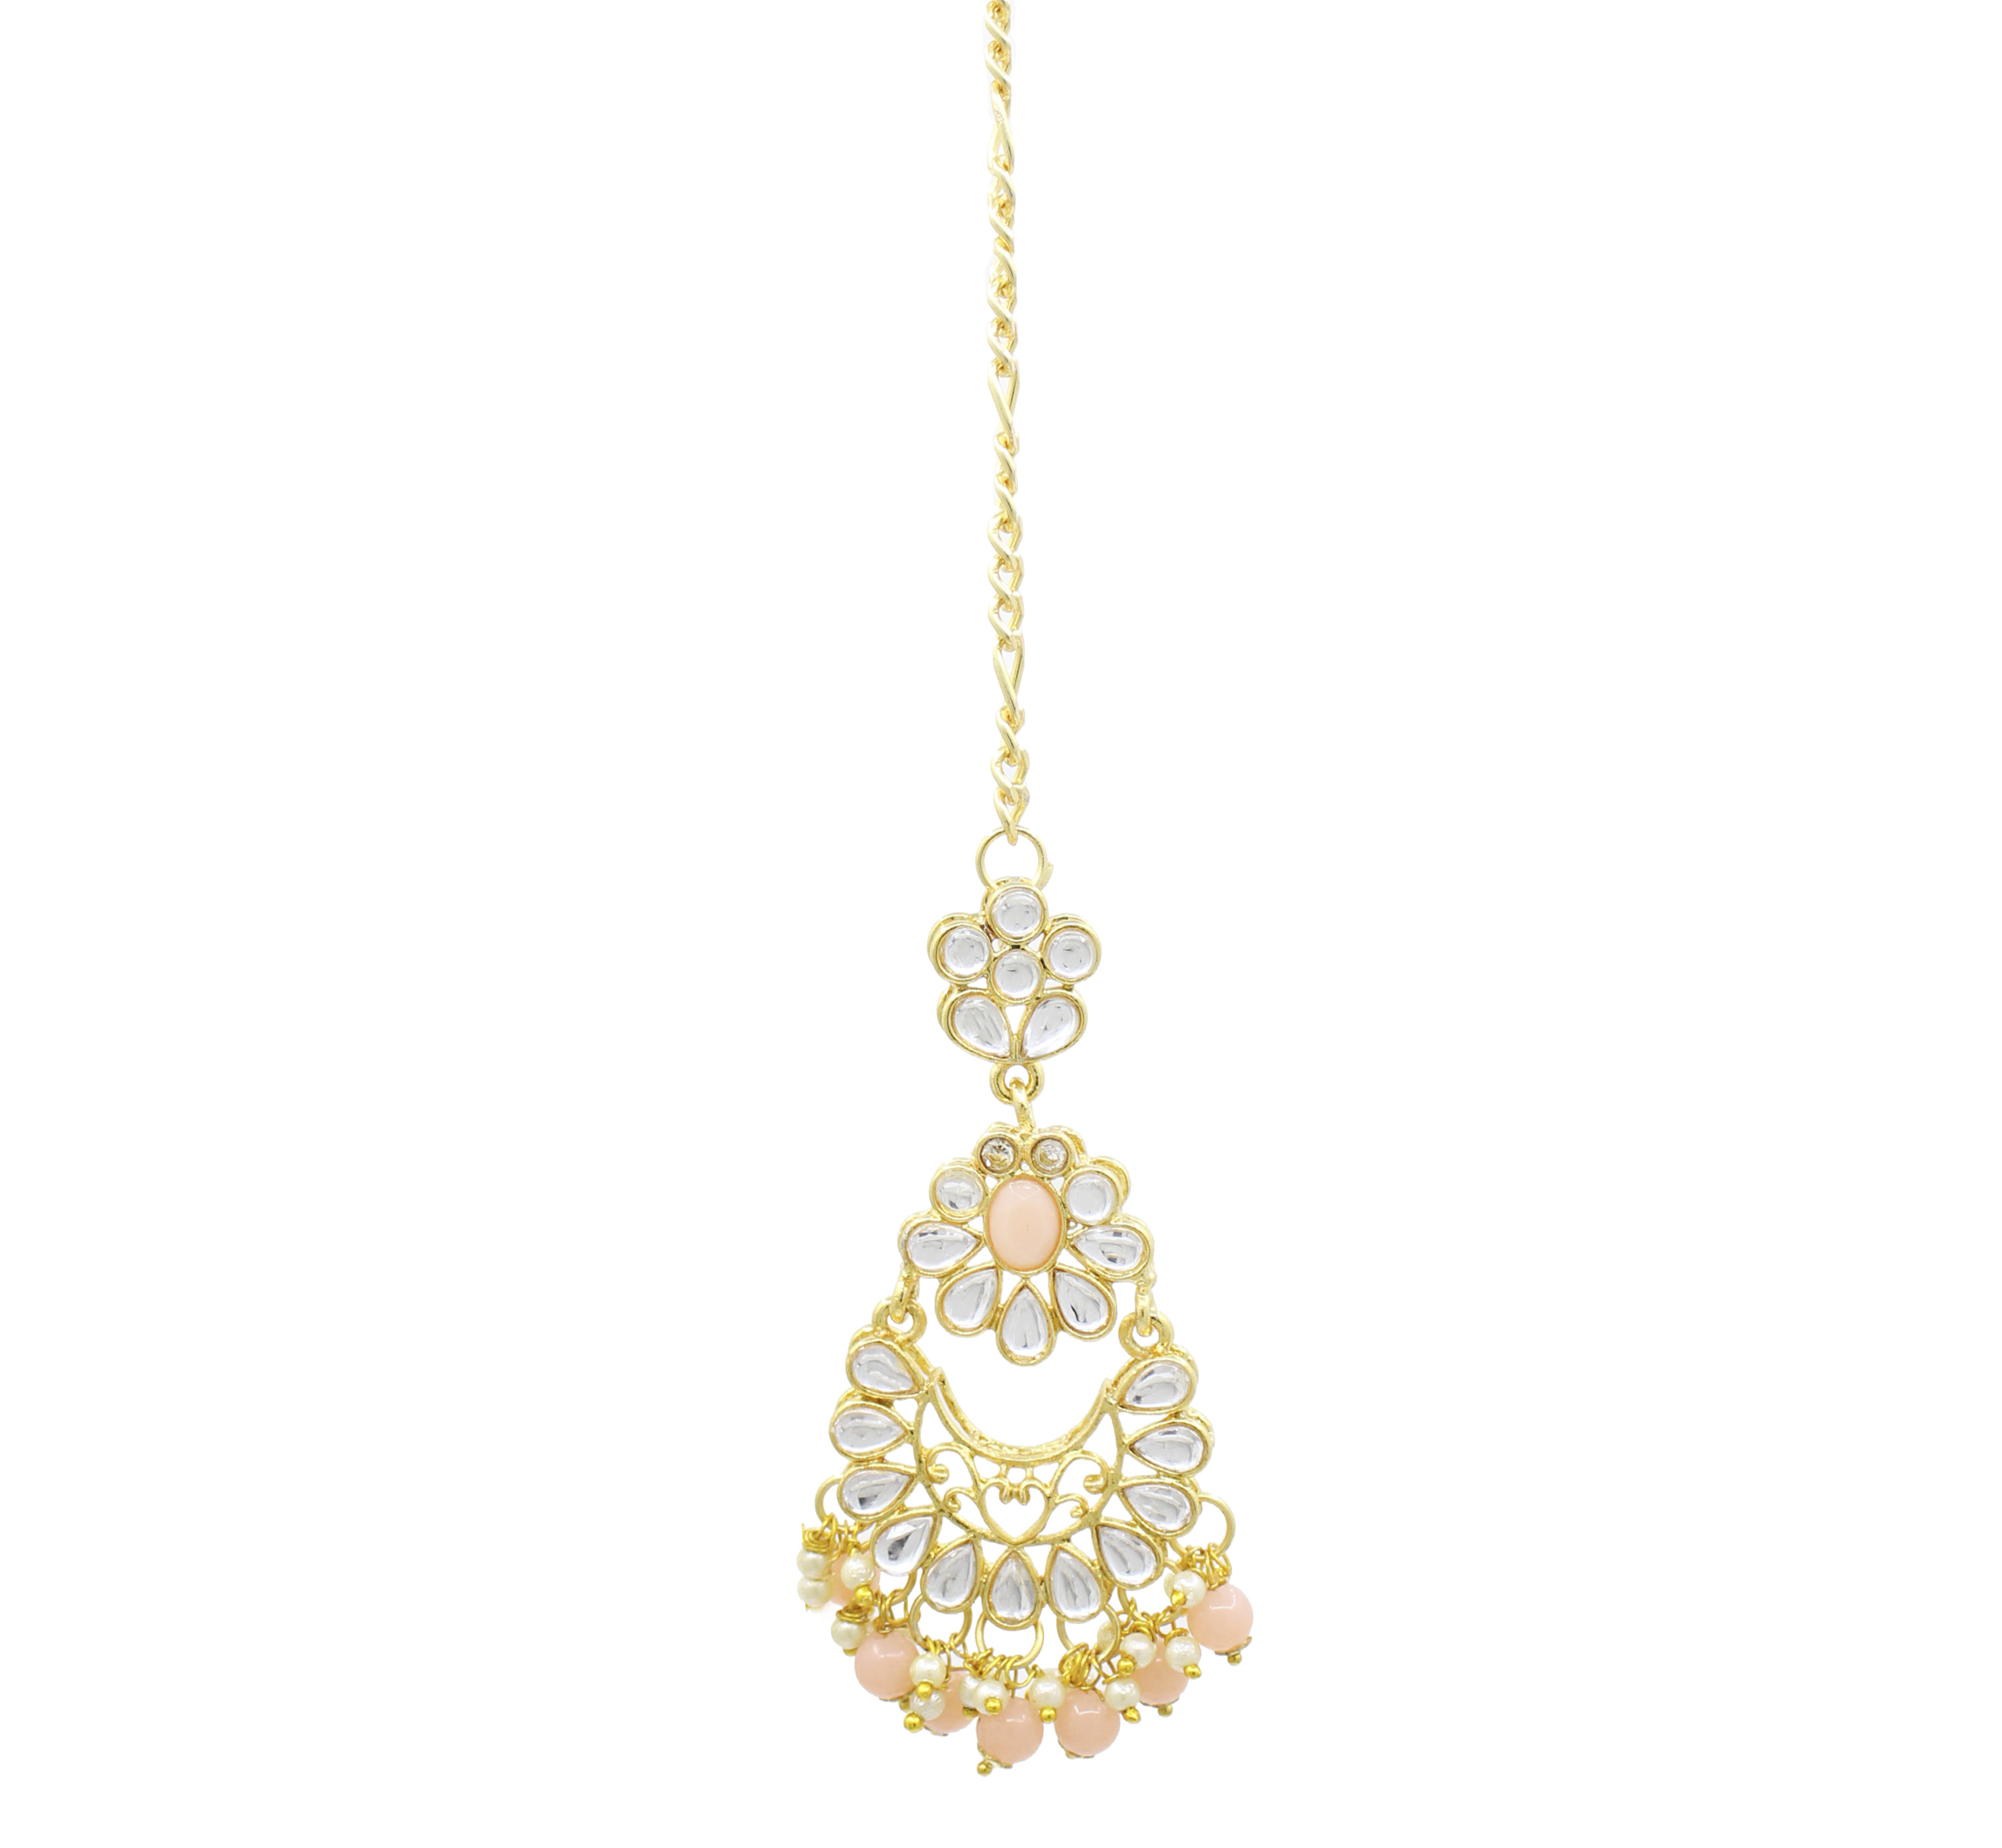 Party Wear Kundan Gold Plated Peach Color Choker Necklace Earring With Maangtikka Jewellery Set